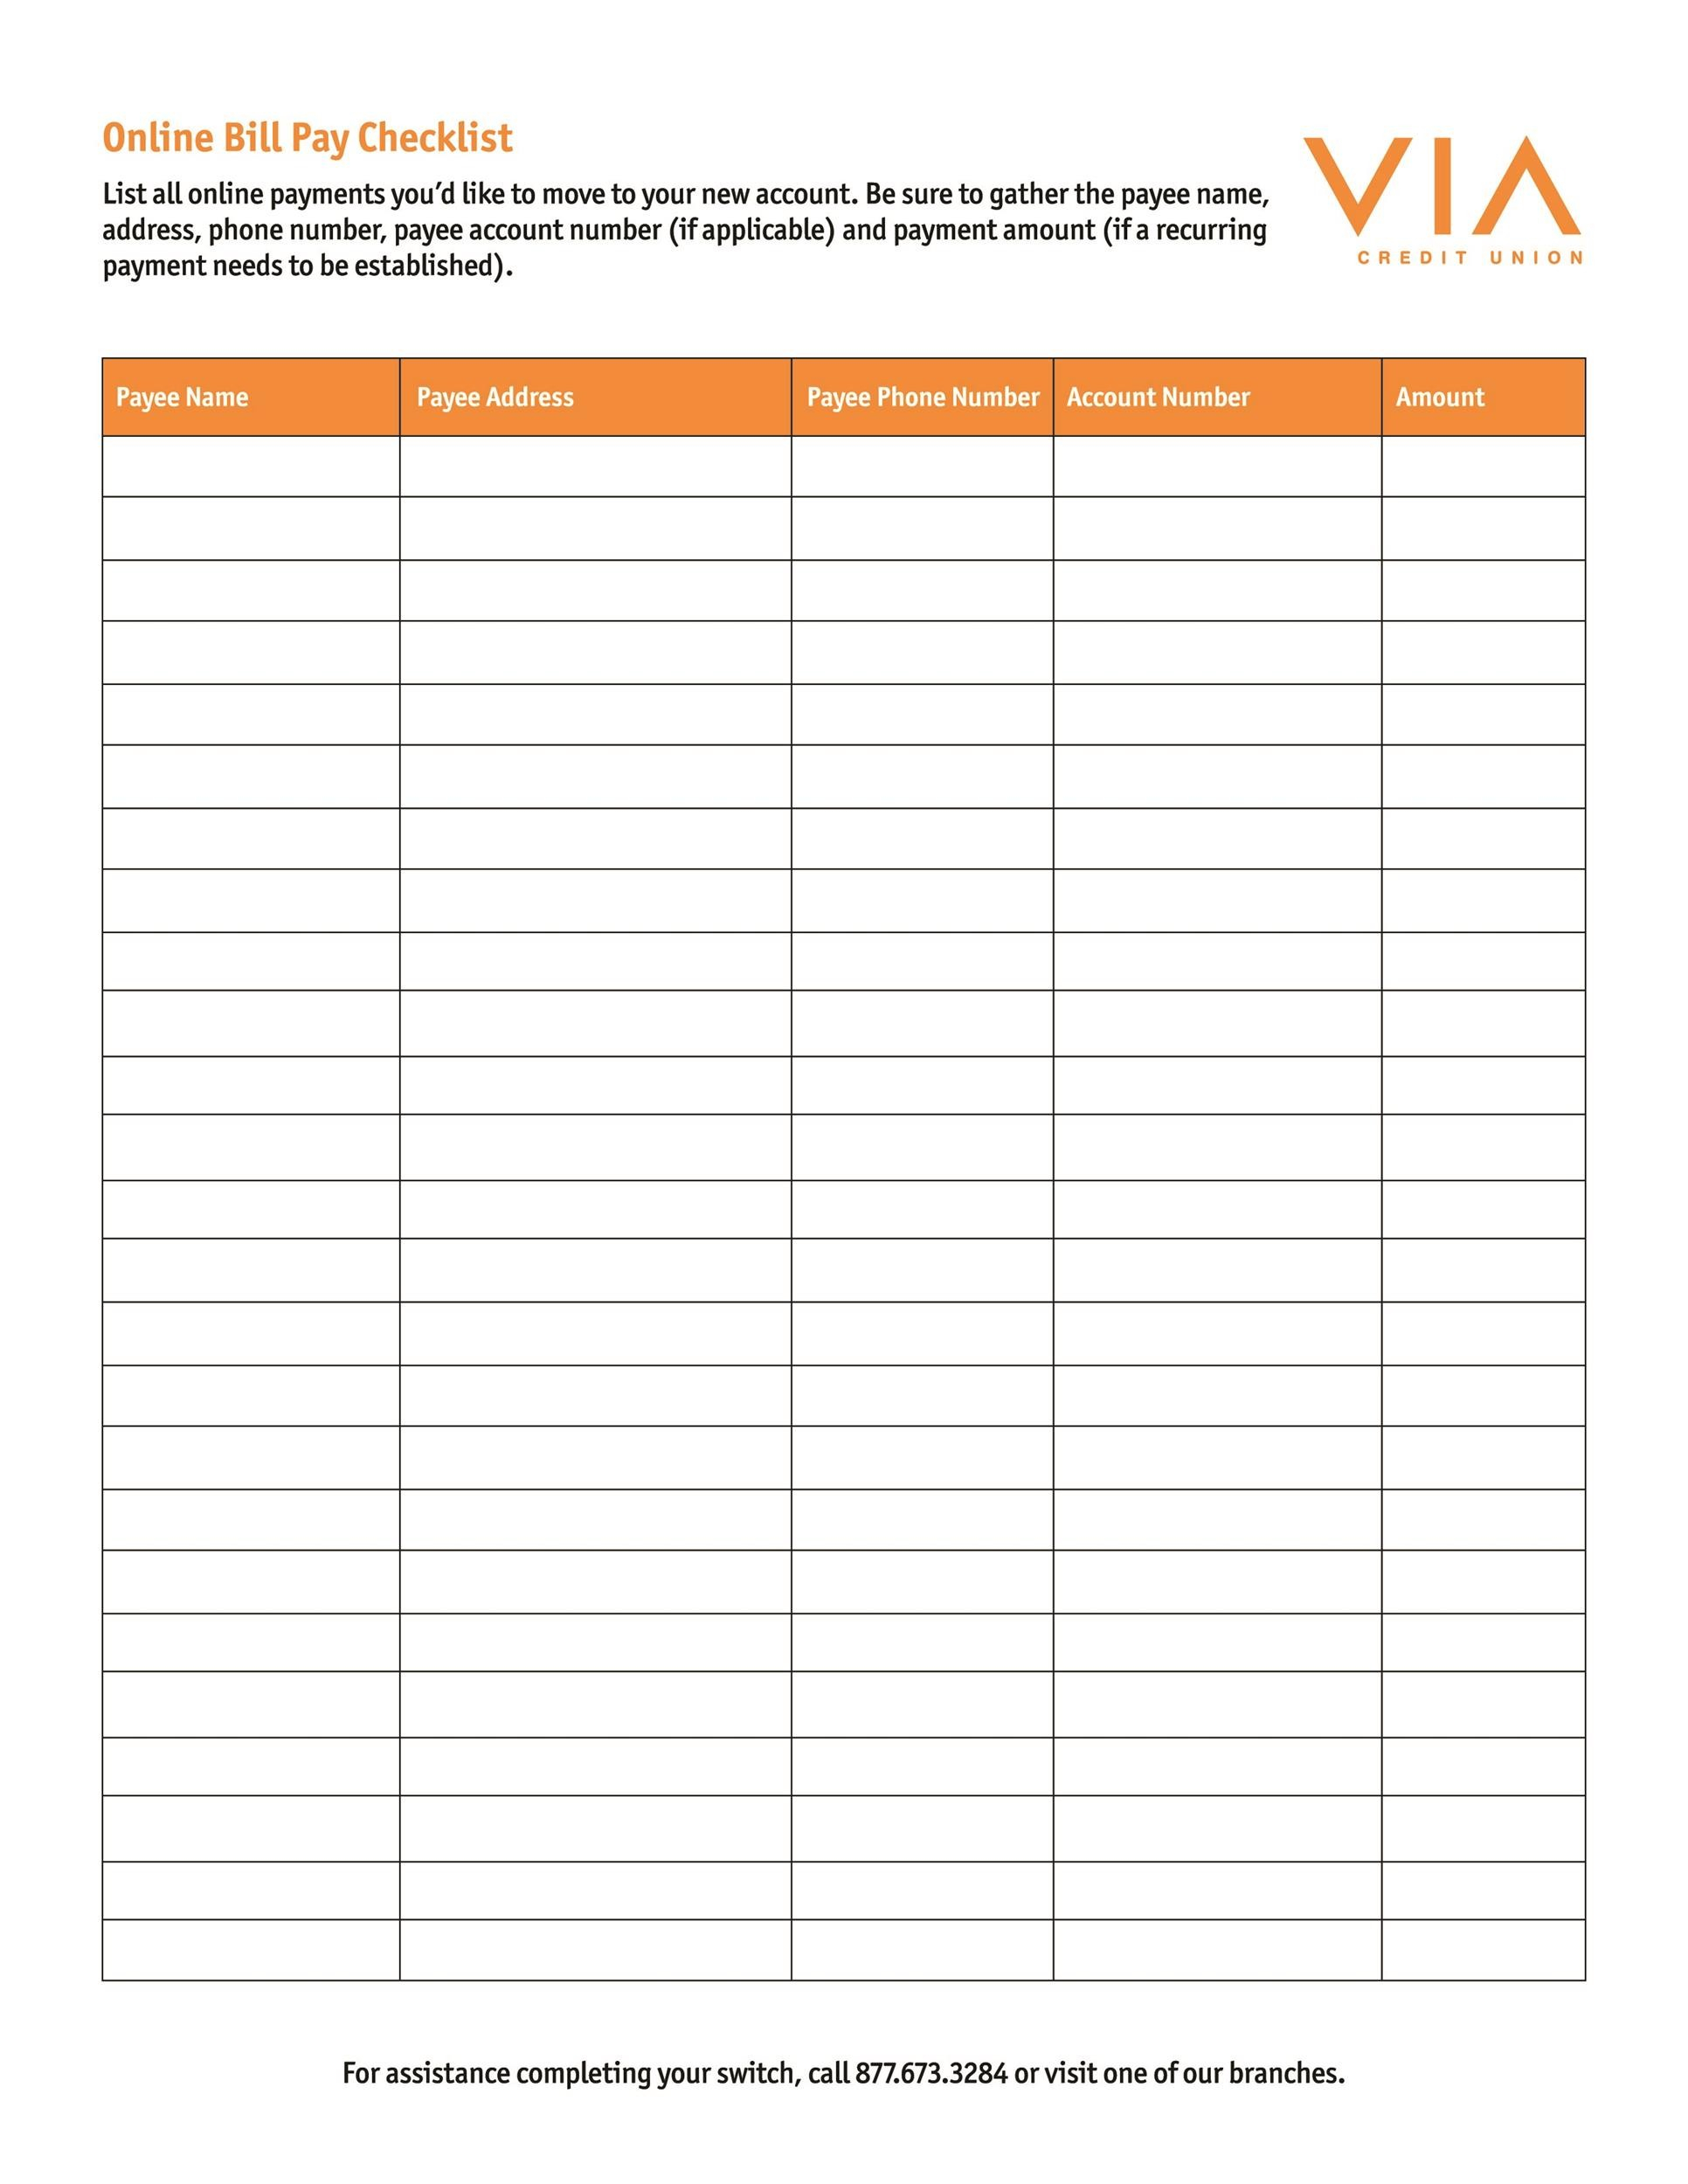 blank payment chart - Bancar With Payment Checklist Template With Regard To Payment Checklist Template